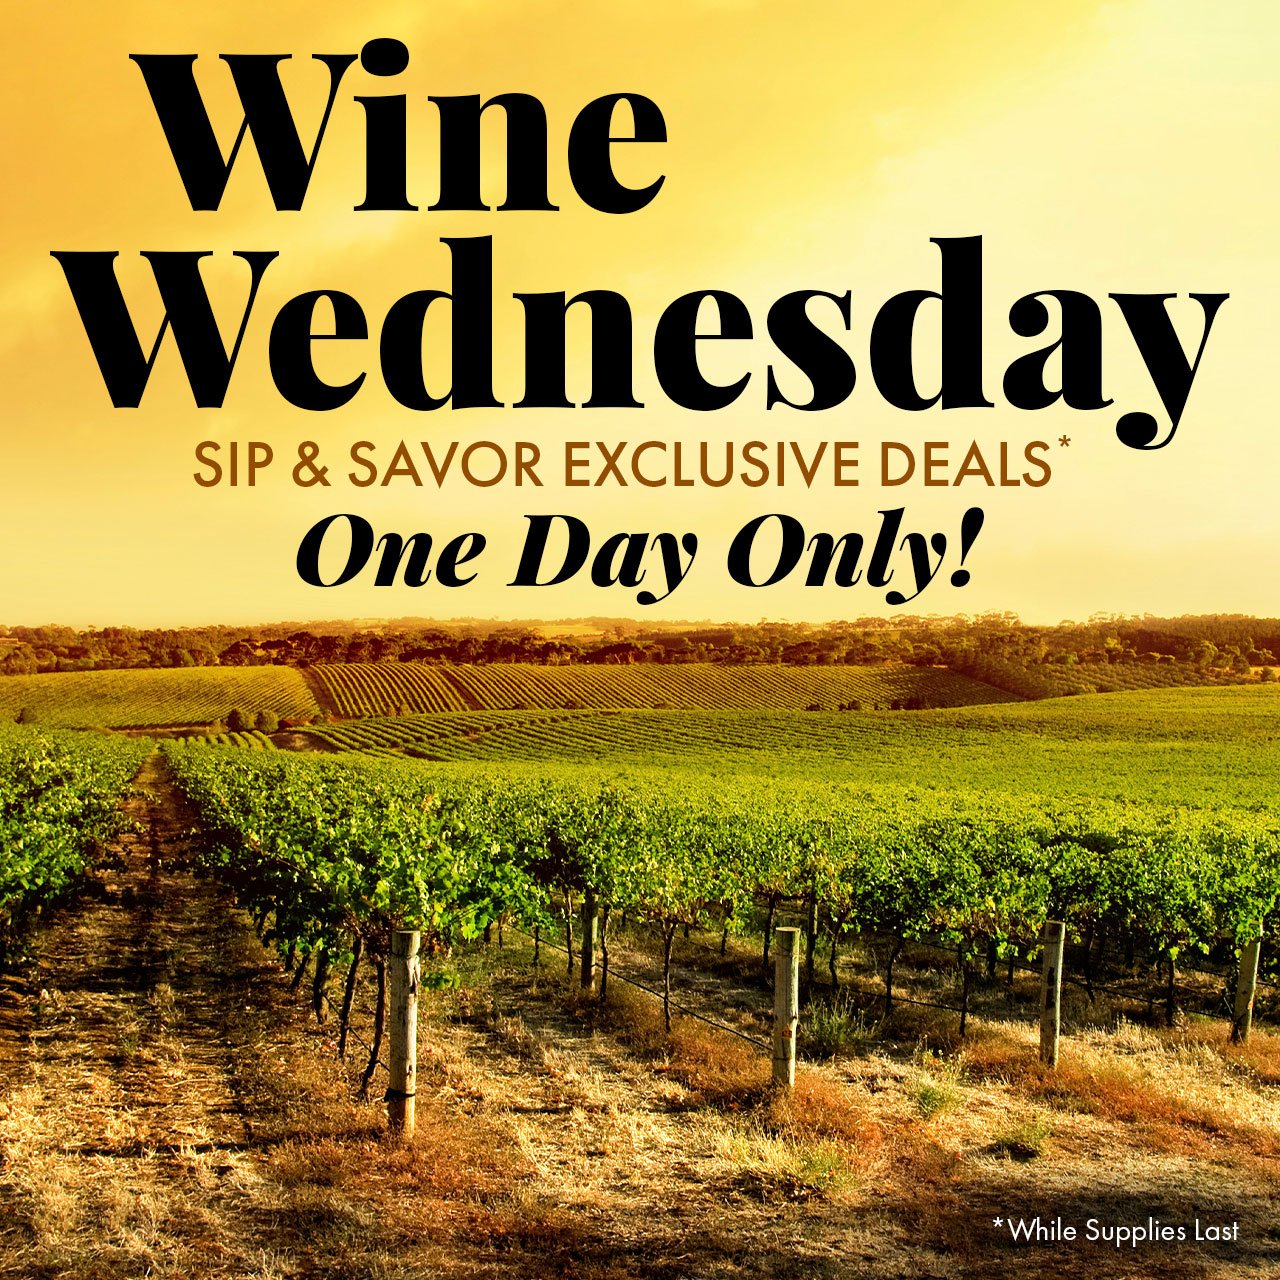 Wine Wednesday. Sip & Savor Exclusive Deals. One Day Only! * While Supplies Last